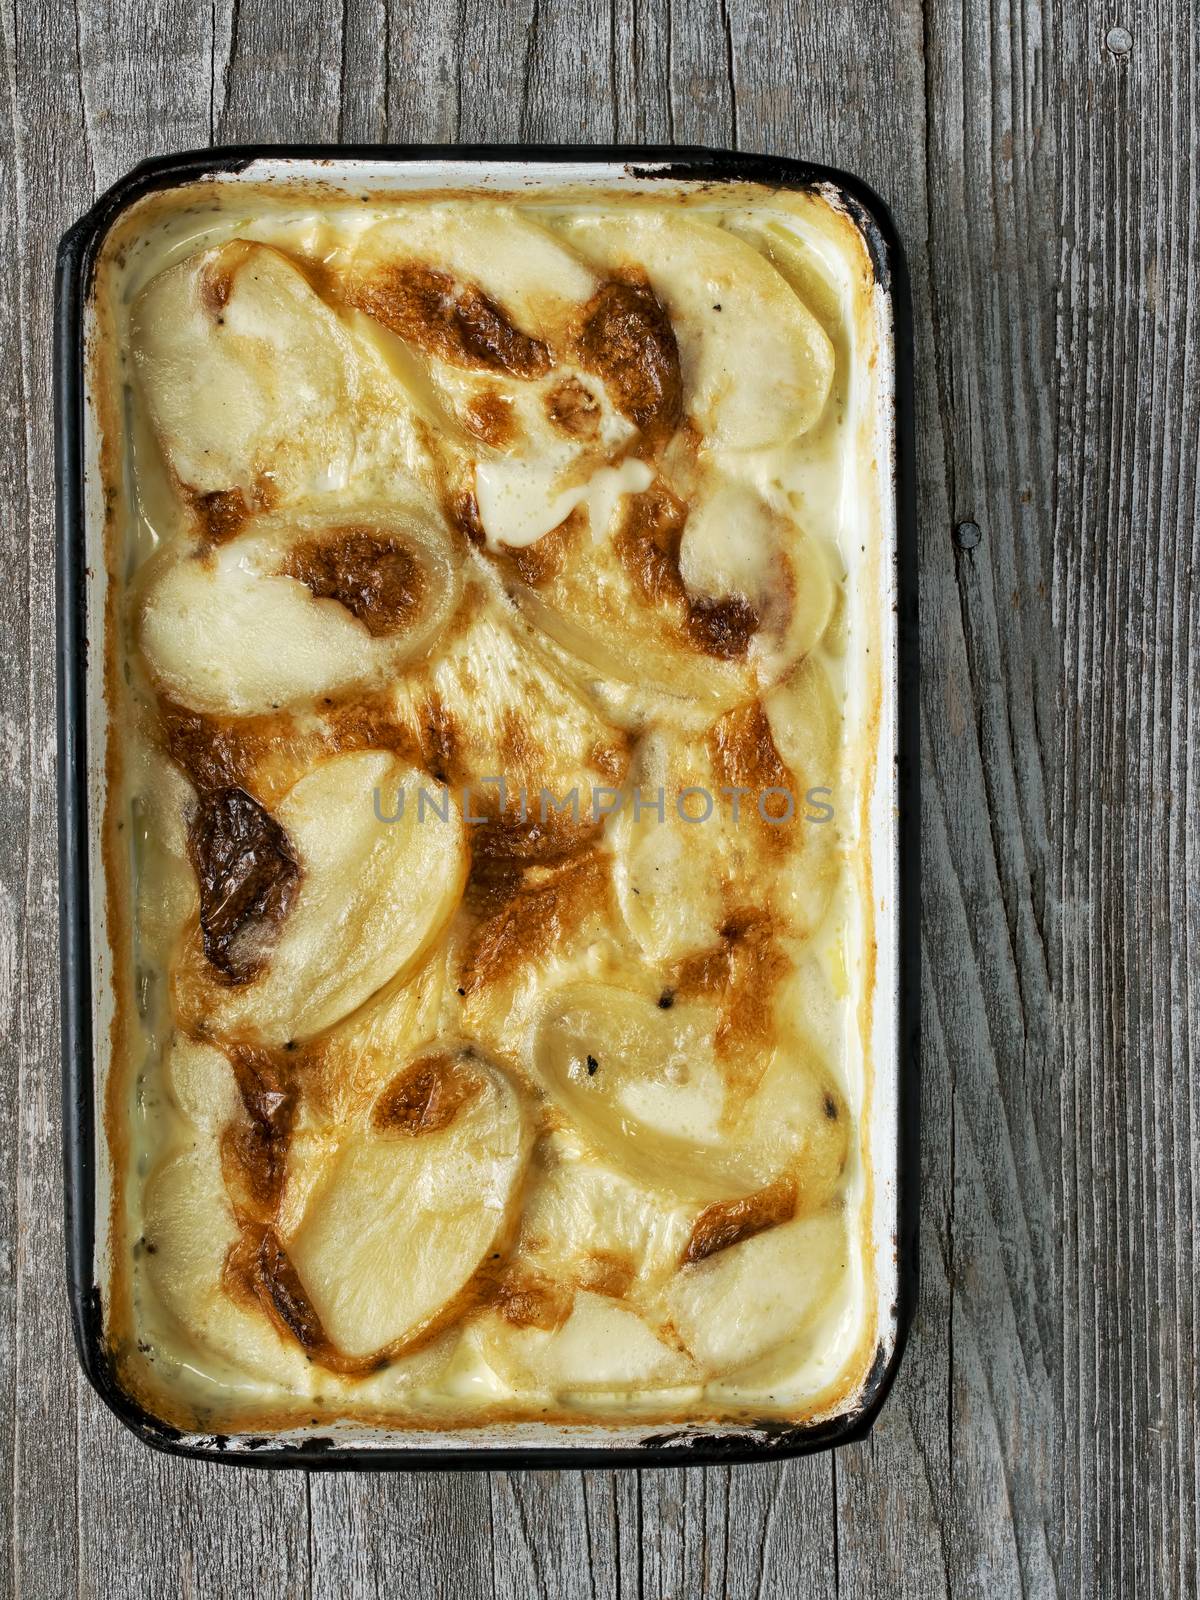 rustic golden scalloped potato gratin dauphinois by zkruger